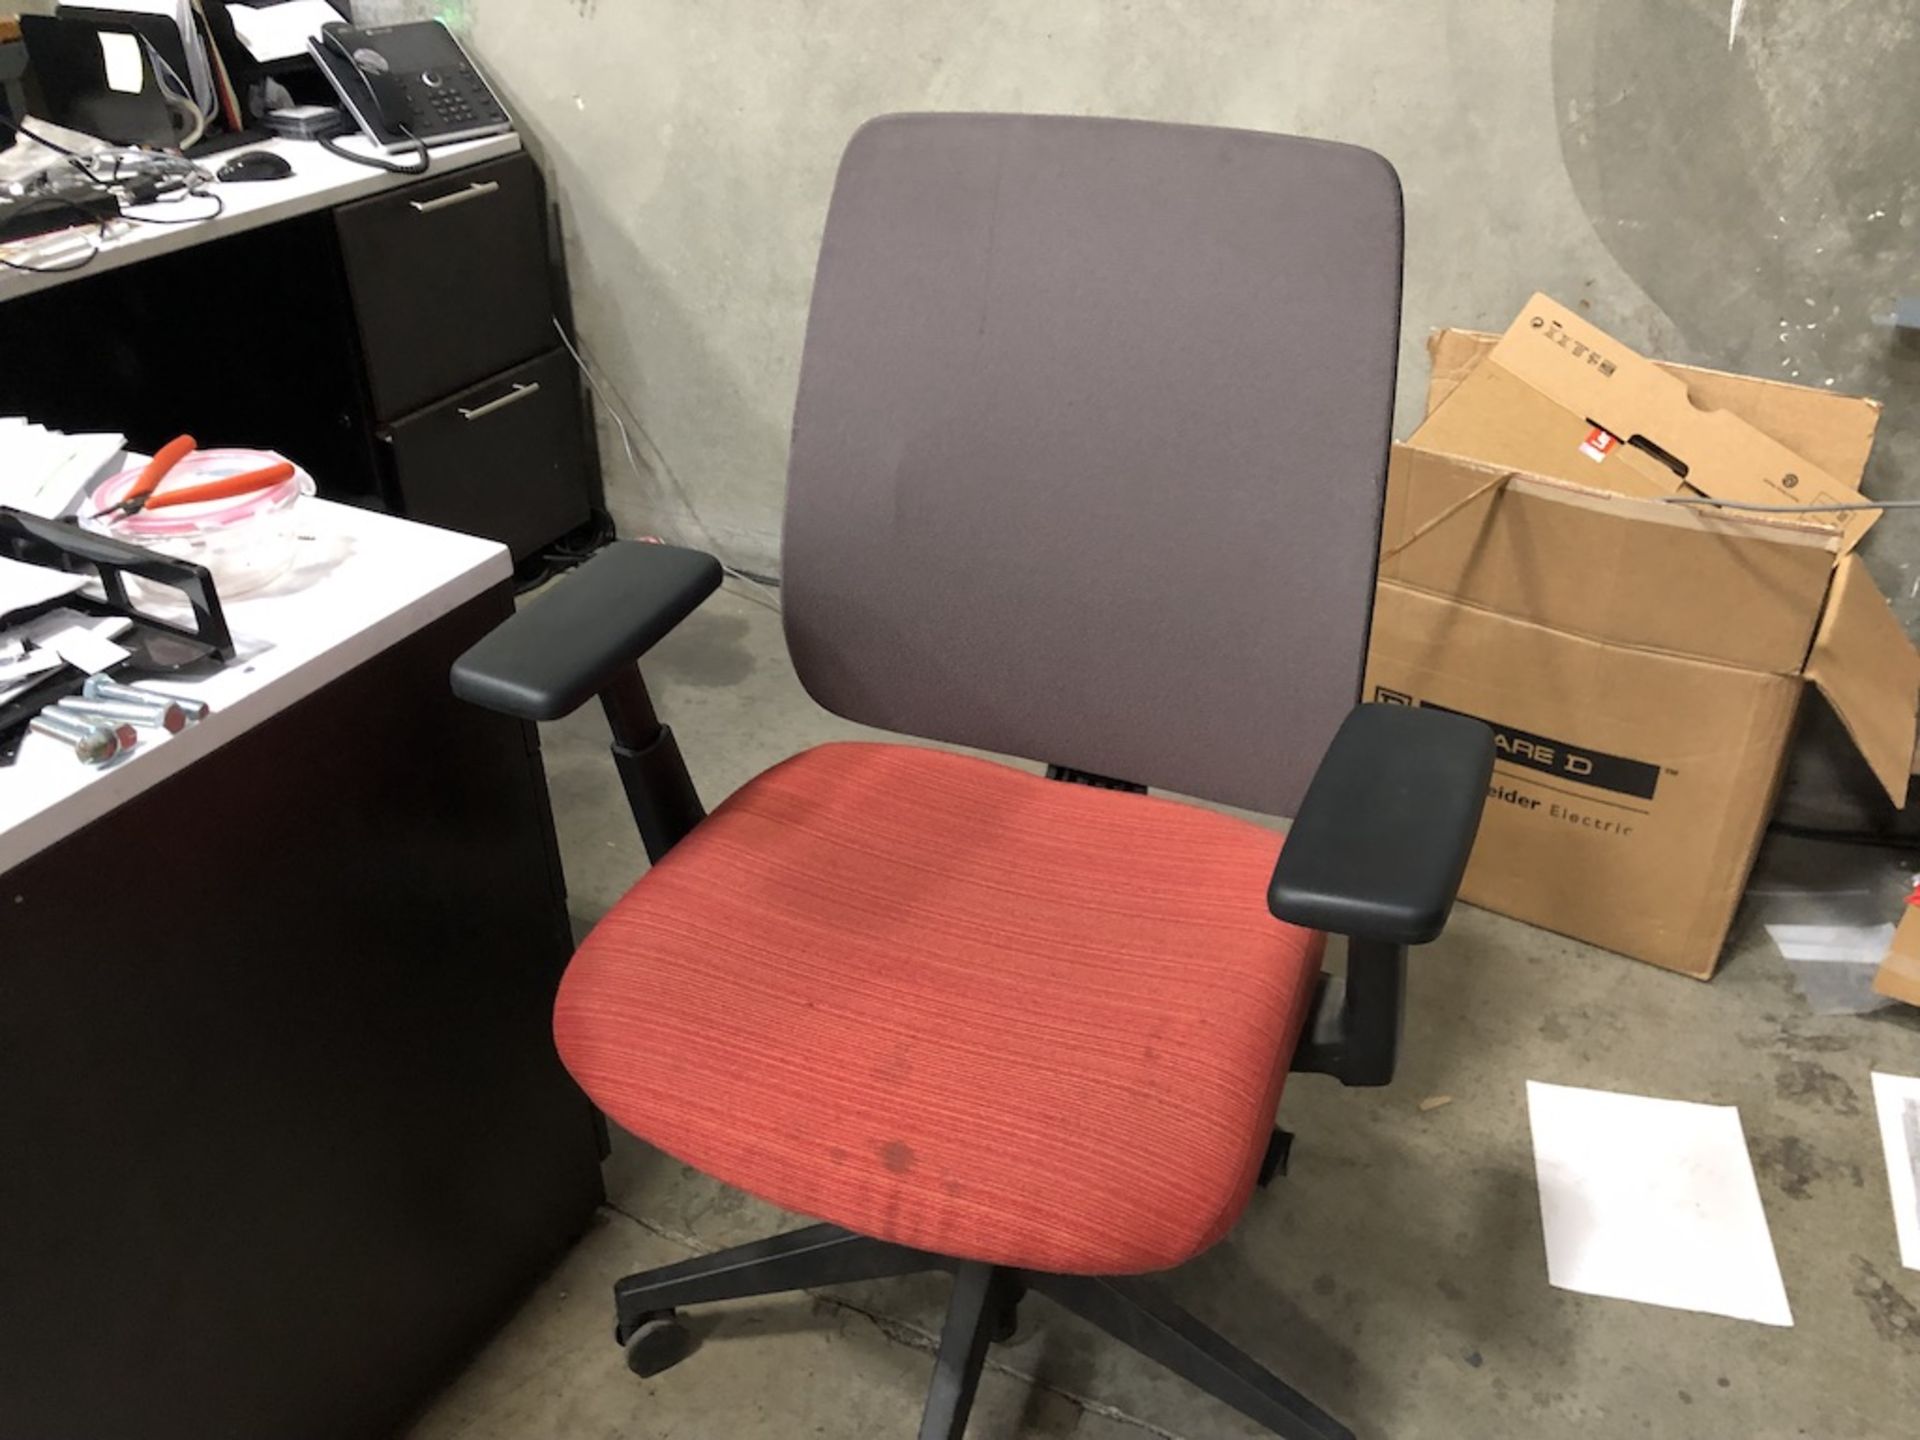 5 CASTER ORANGE CUSHION PADDED OFFICE CHAIR W/ PADDED ARM RESTS   SCHNEIDER ELECTRIC- 6611 PRESTON - Image 3 of 3